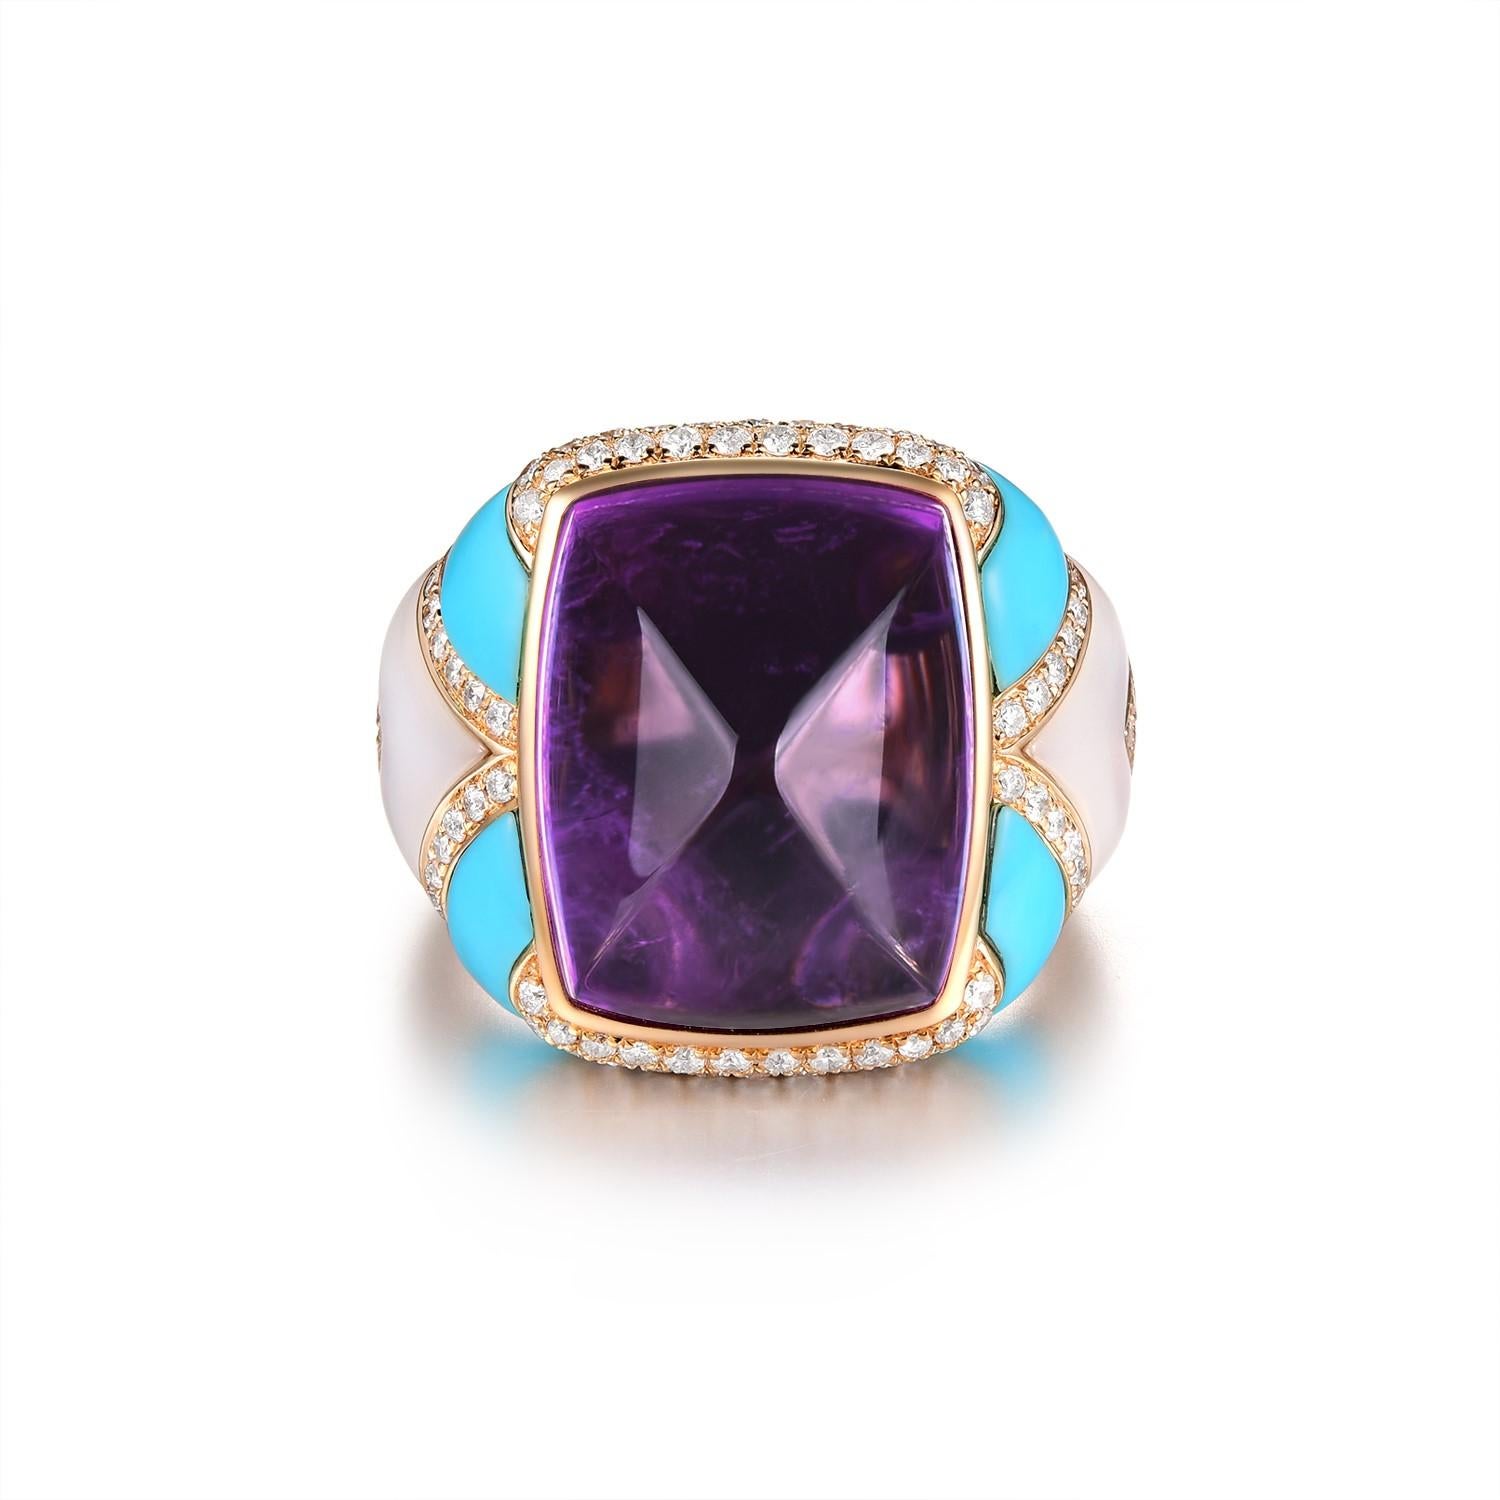 This ring features an cushion cabochon amethyst weight 15.36 carat, surrounded by a diamond weight 0.80 carat. The diamond is surrounded by turquoise. The ring is set in 14 karat yellow gold. 

The Ring size US 7
Resizing is available 
Amethyst